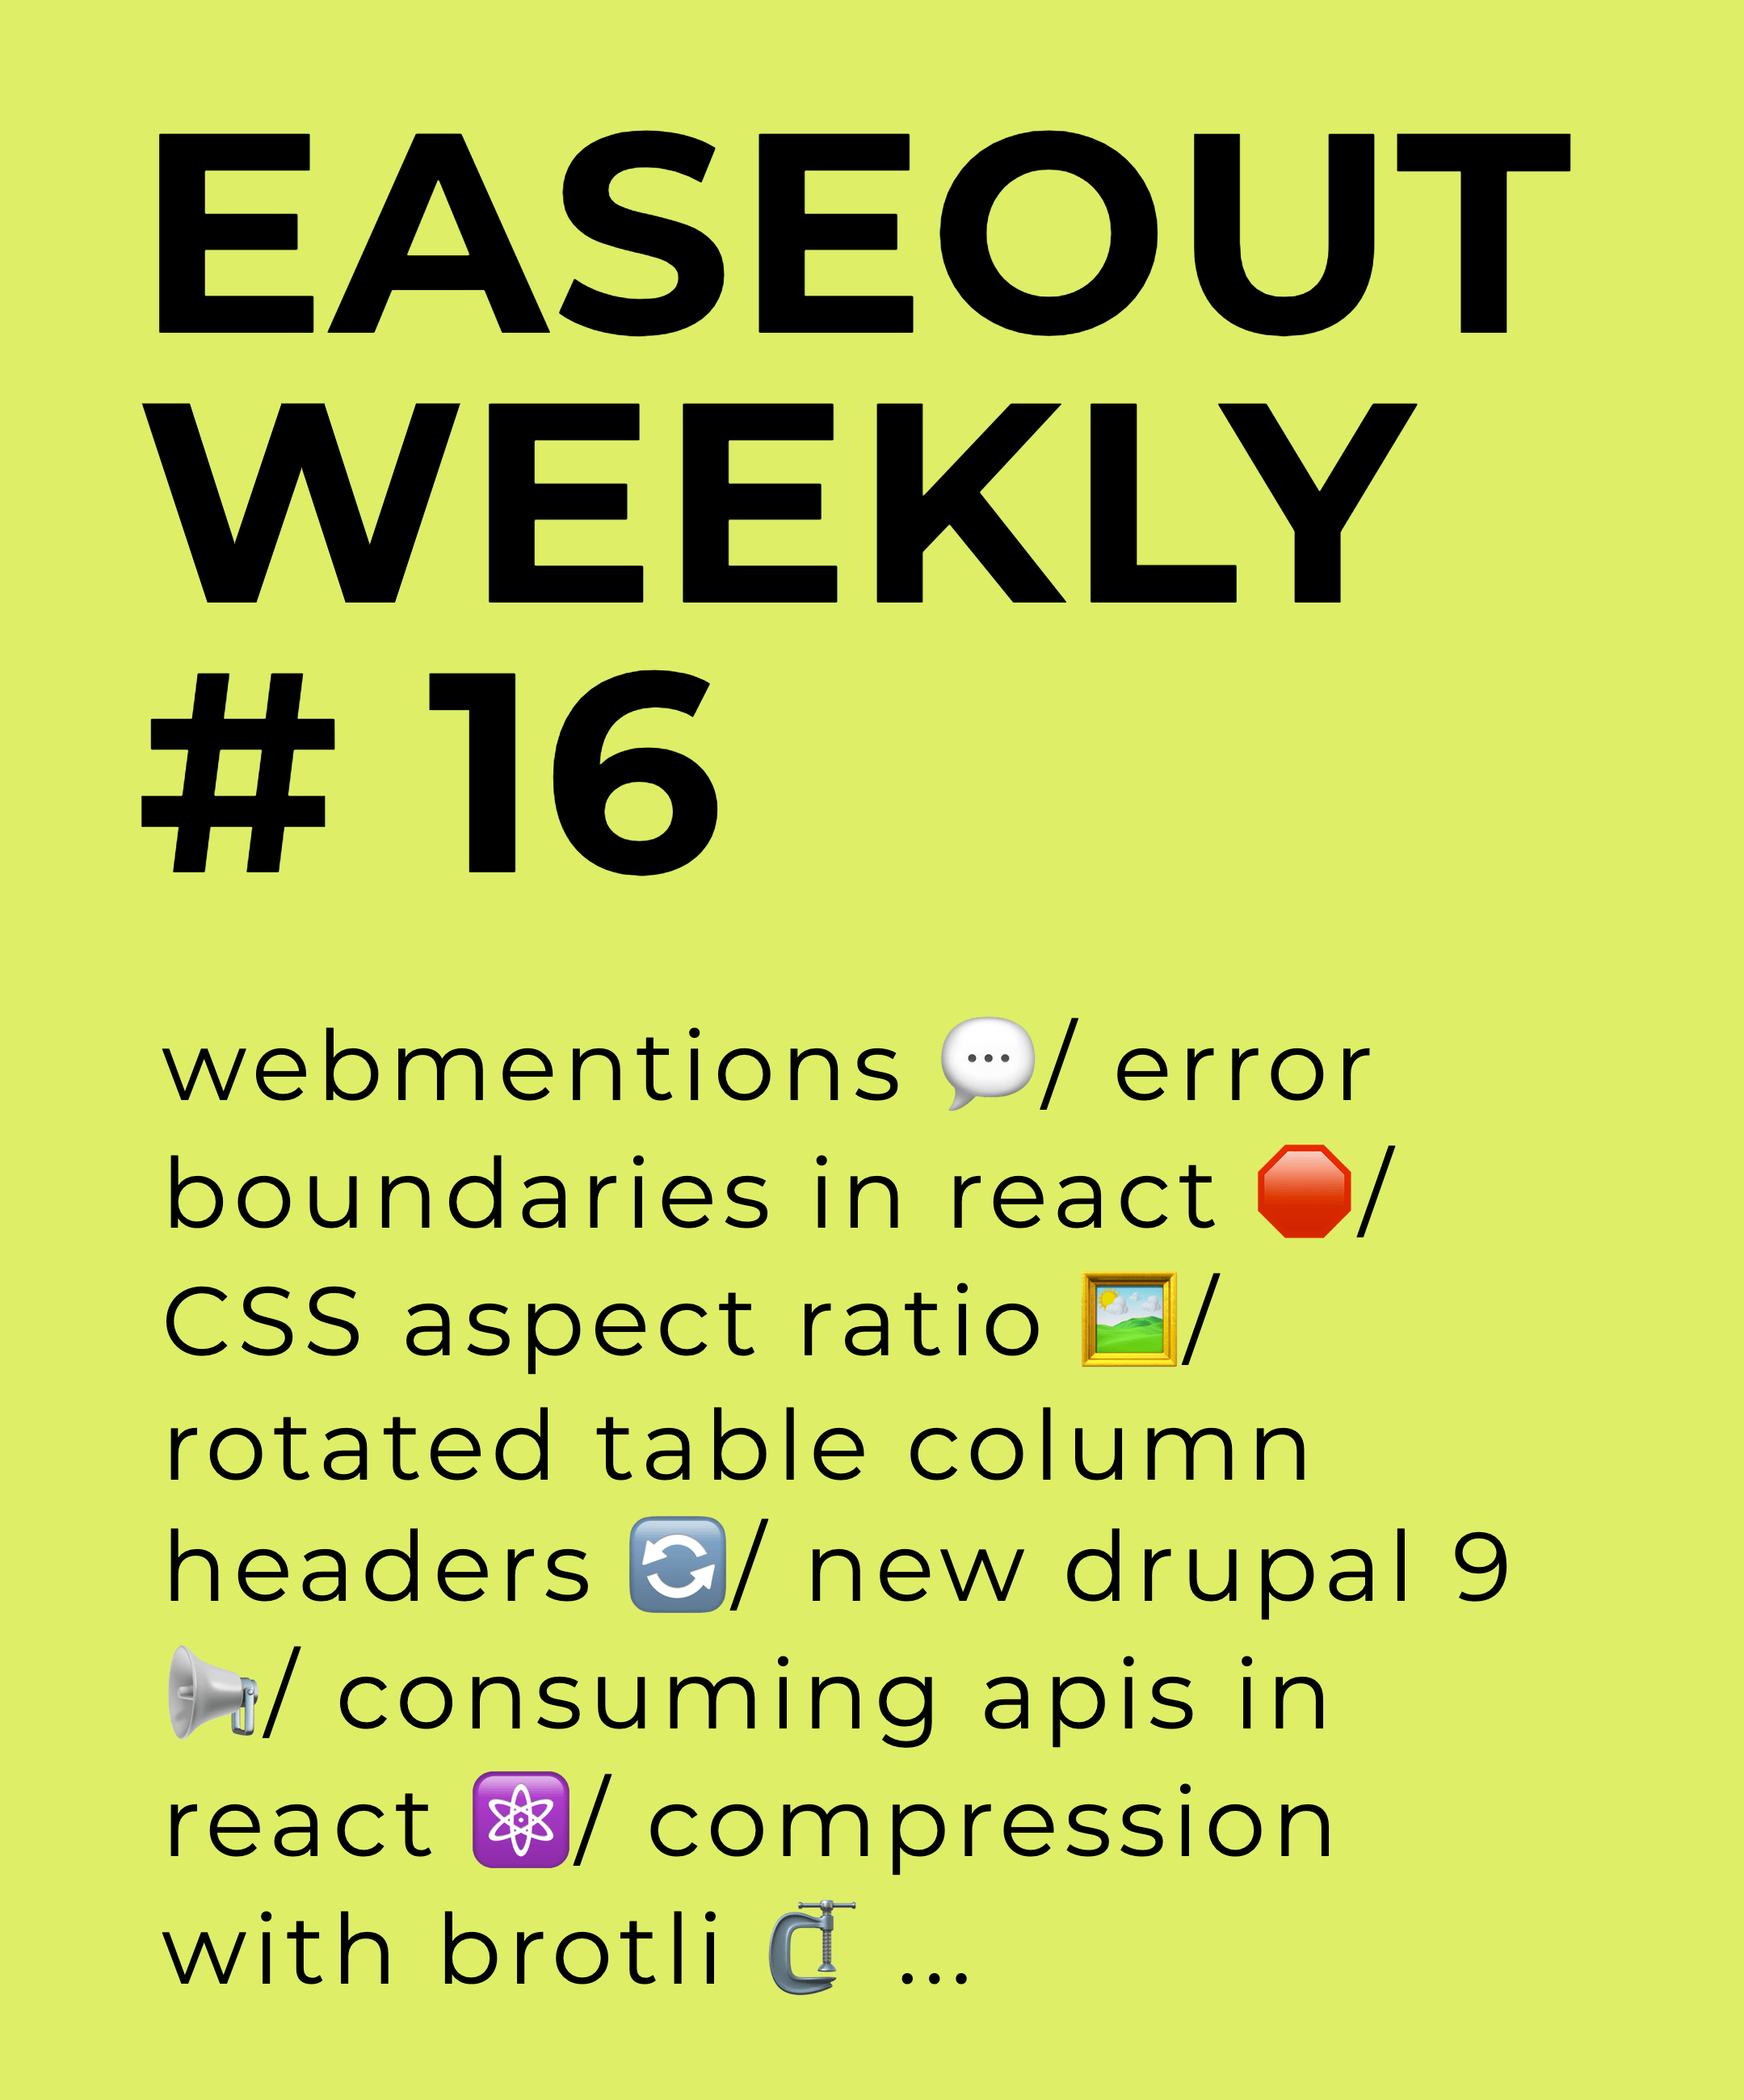 Easeout Weekly #16